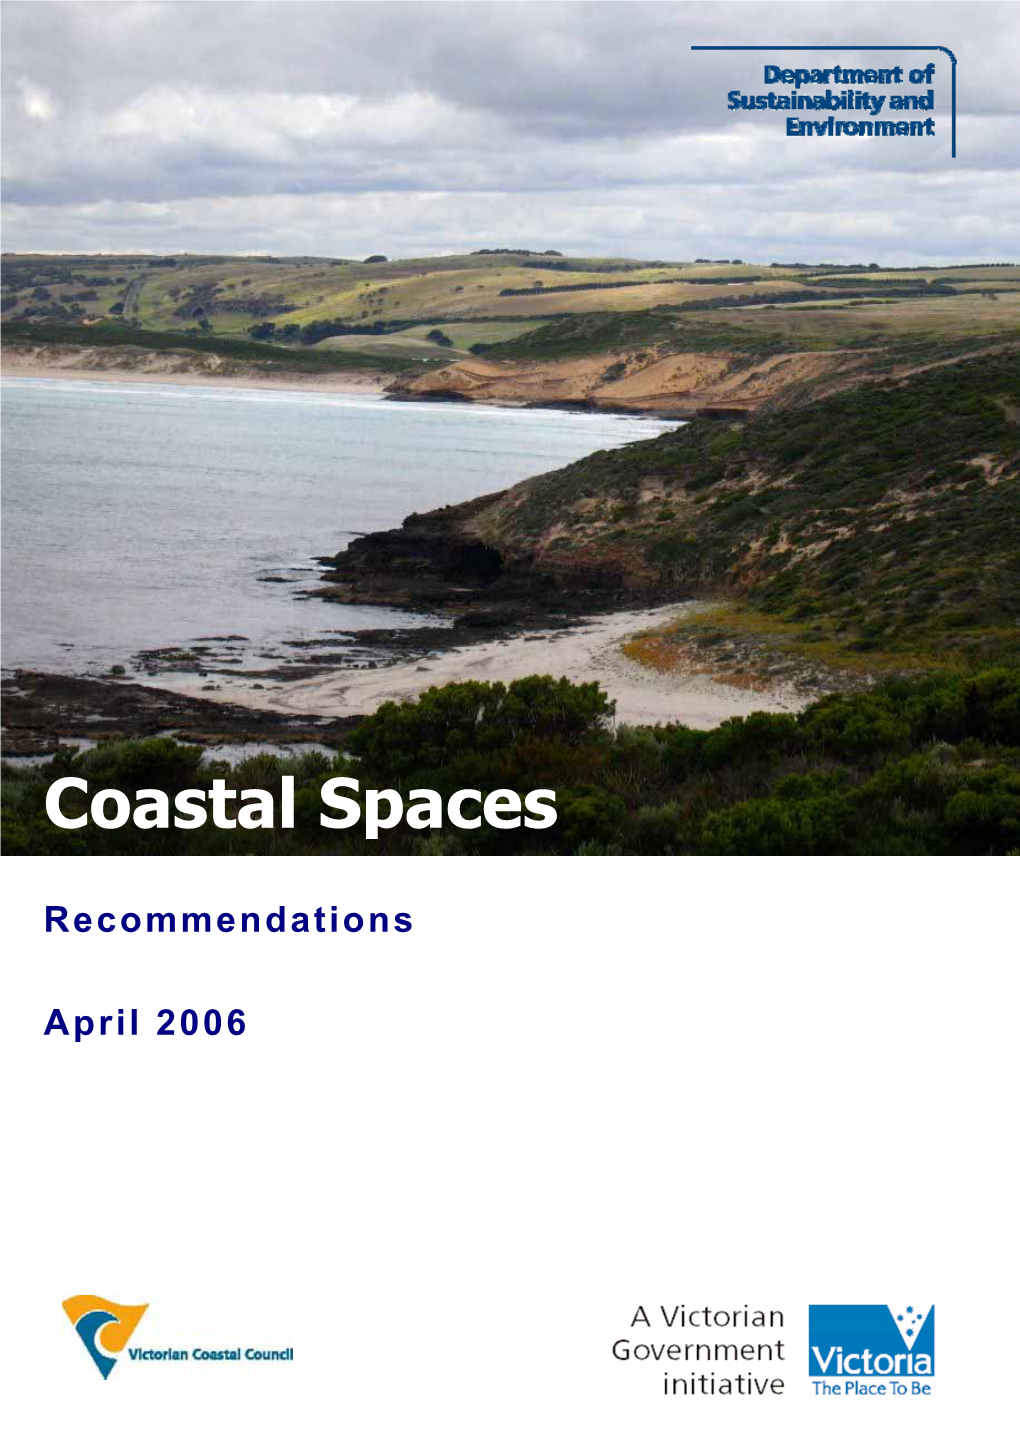 Coastal Spaces - Recommendations Report December 2005